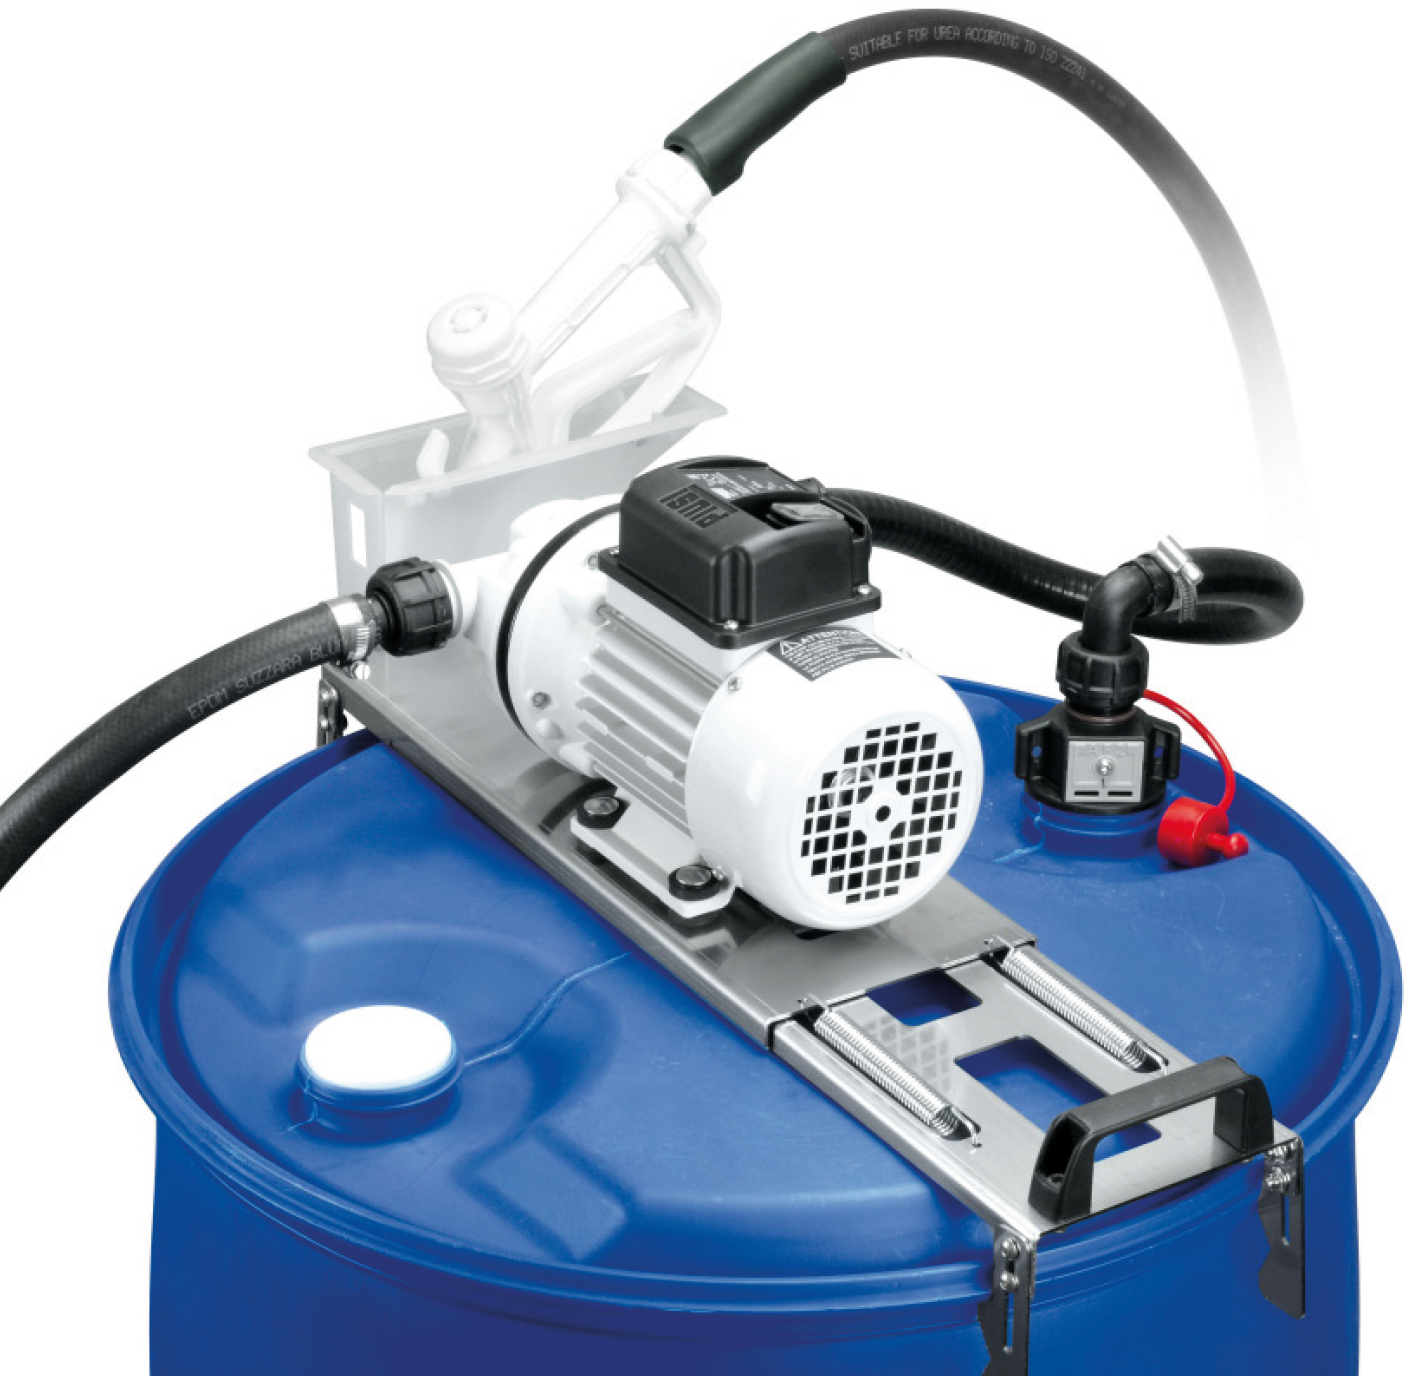 Adblue Pump from Sturdy Products